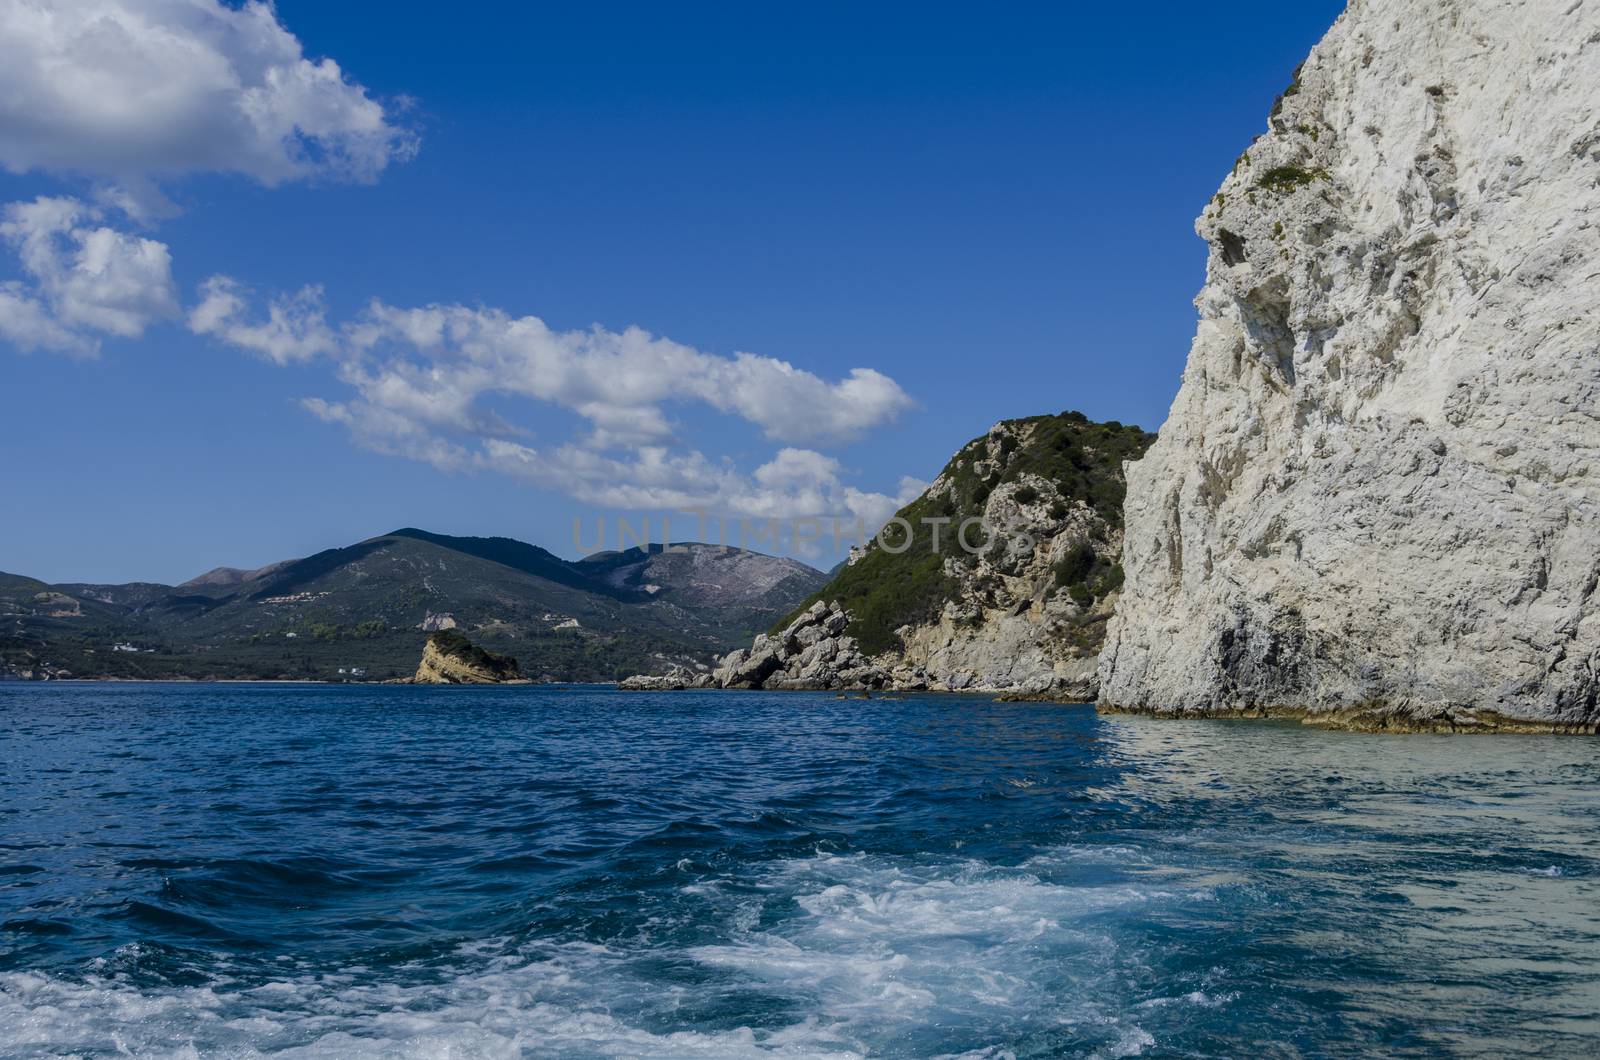 View of the island of zakynthos from the sea by MAEKFOTO